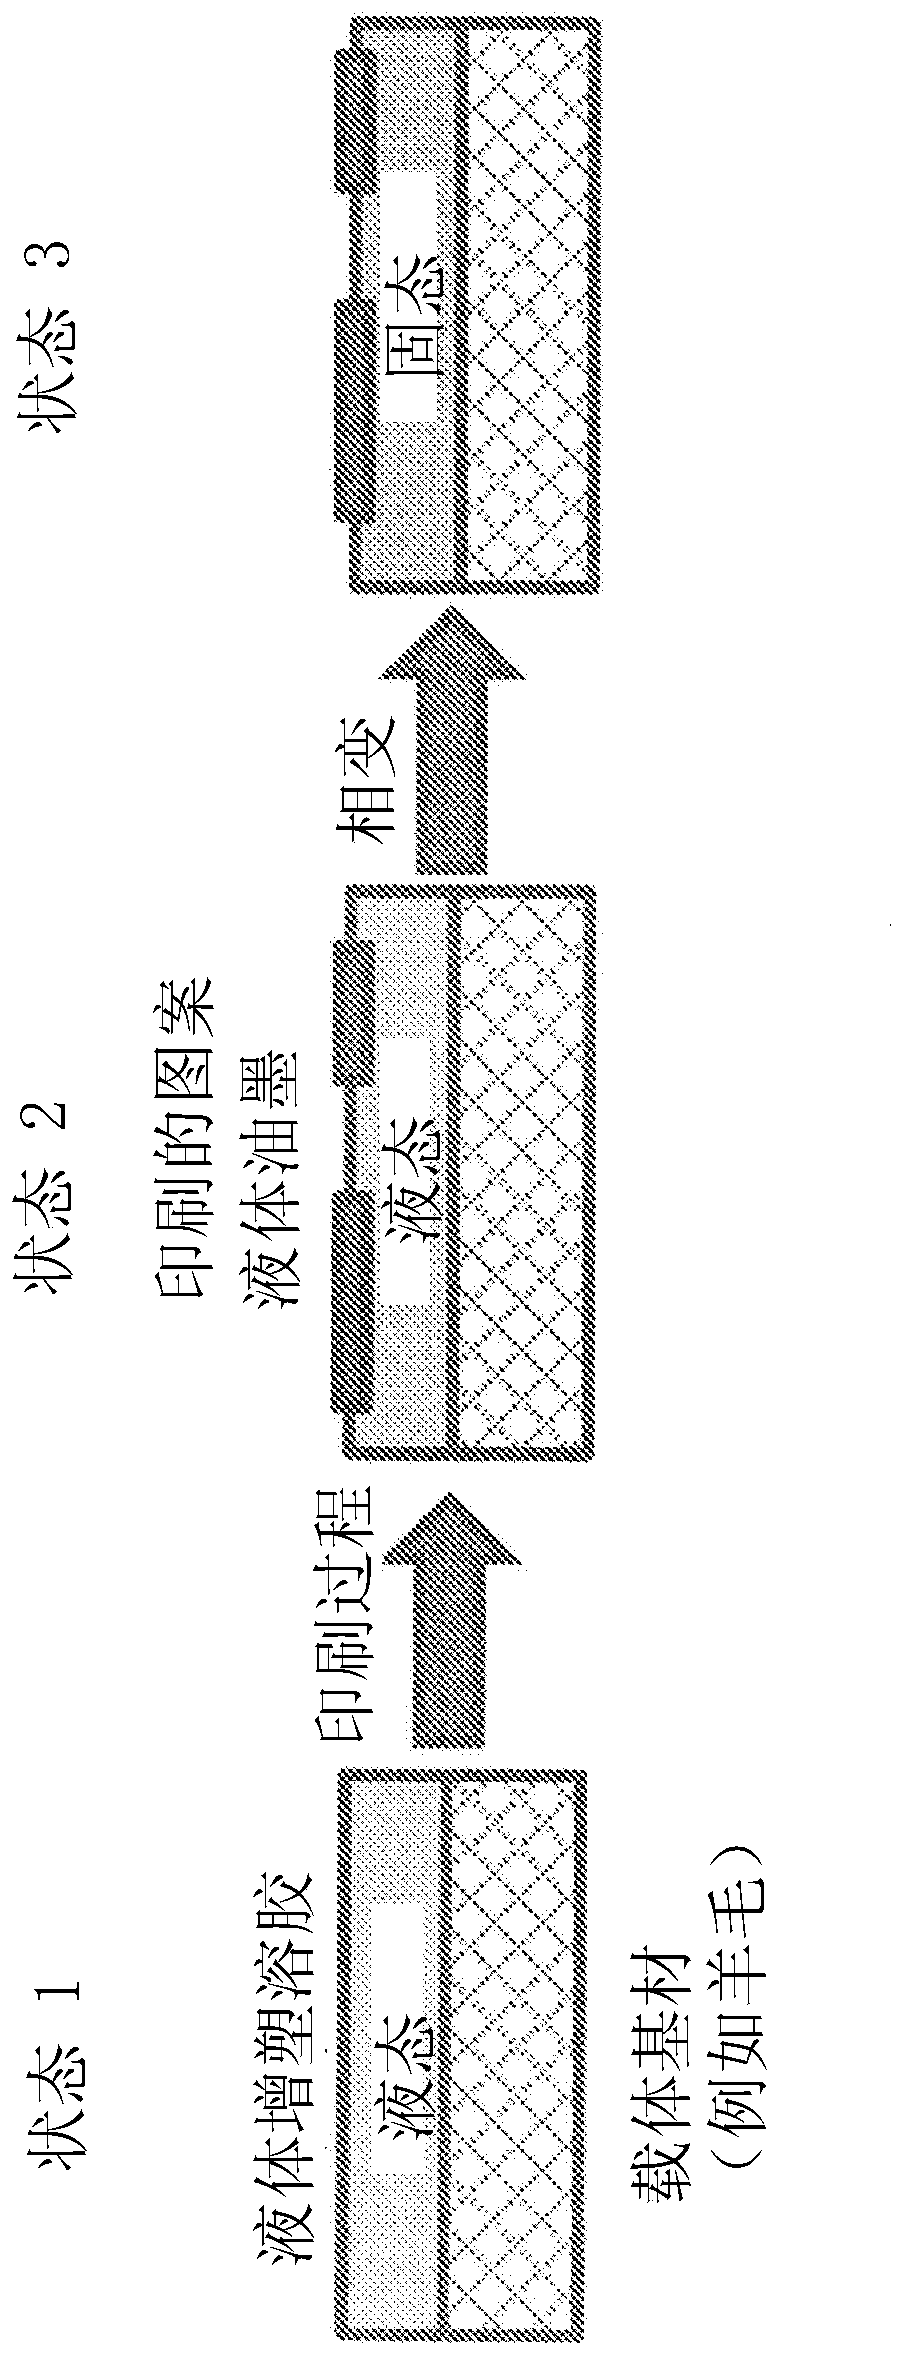 Method of forming surface covering, apparatus for forming surface covering, and surface covering